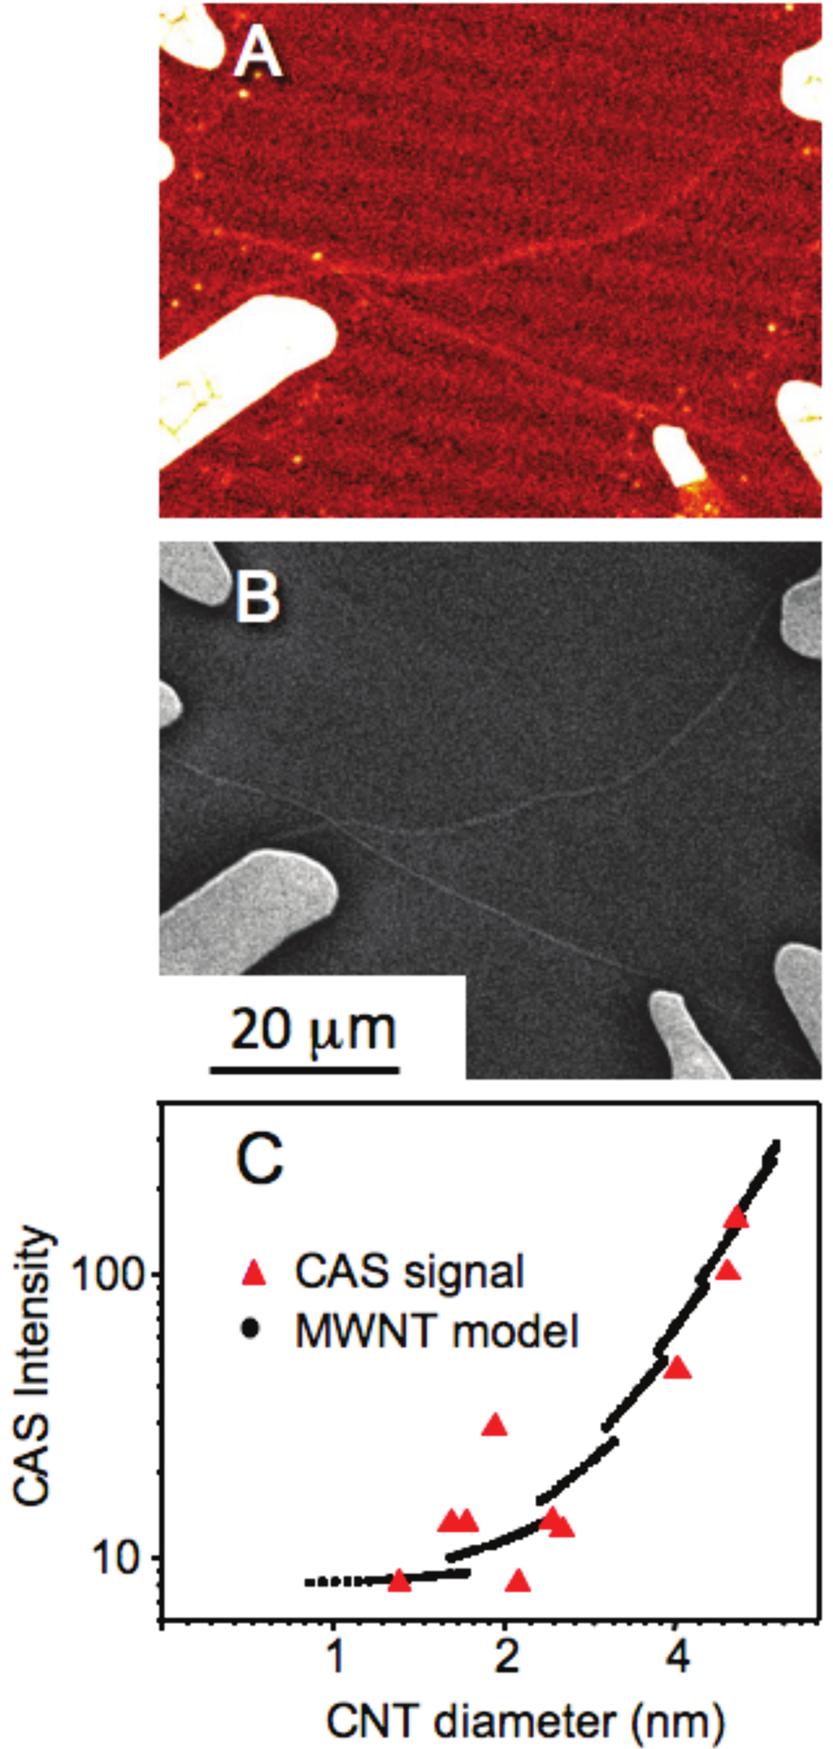 Figure 3. CAS image of an individual CNT when the polarization of the incident beam is (A) parallel and (B) perpendicular to the long axis of the nanotube.